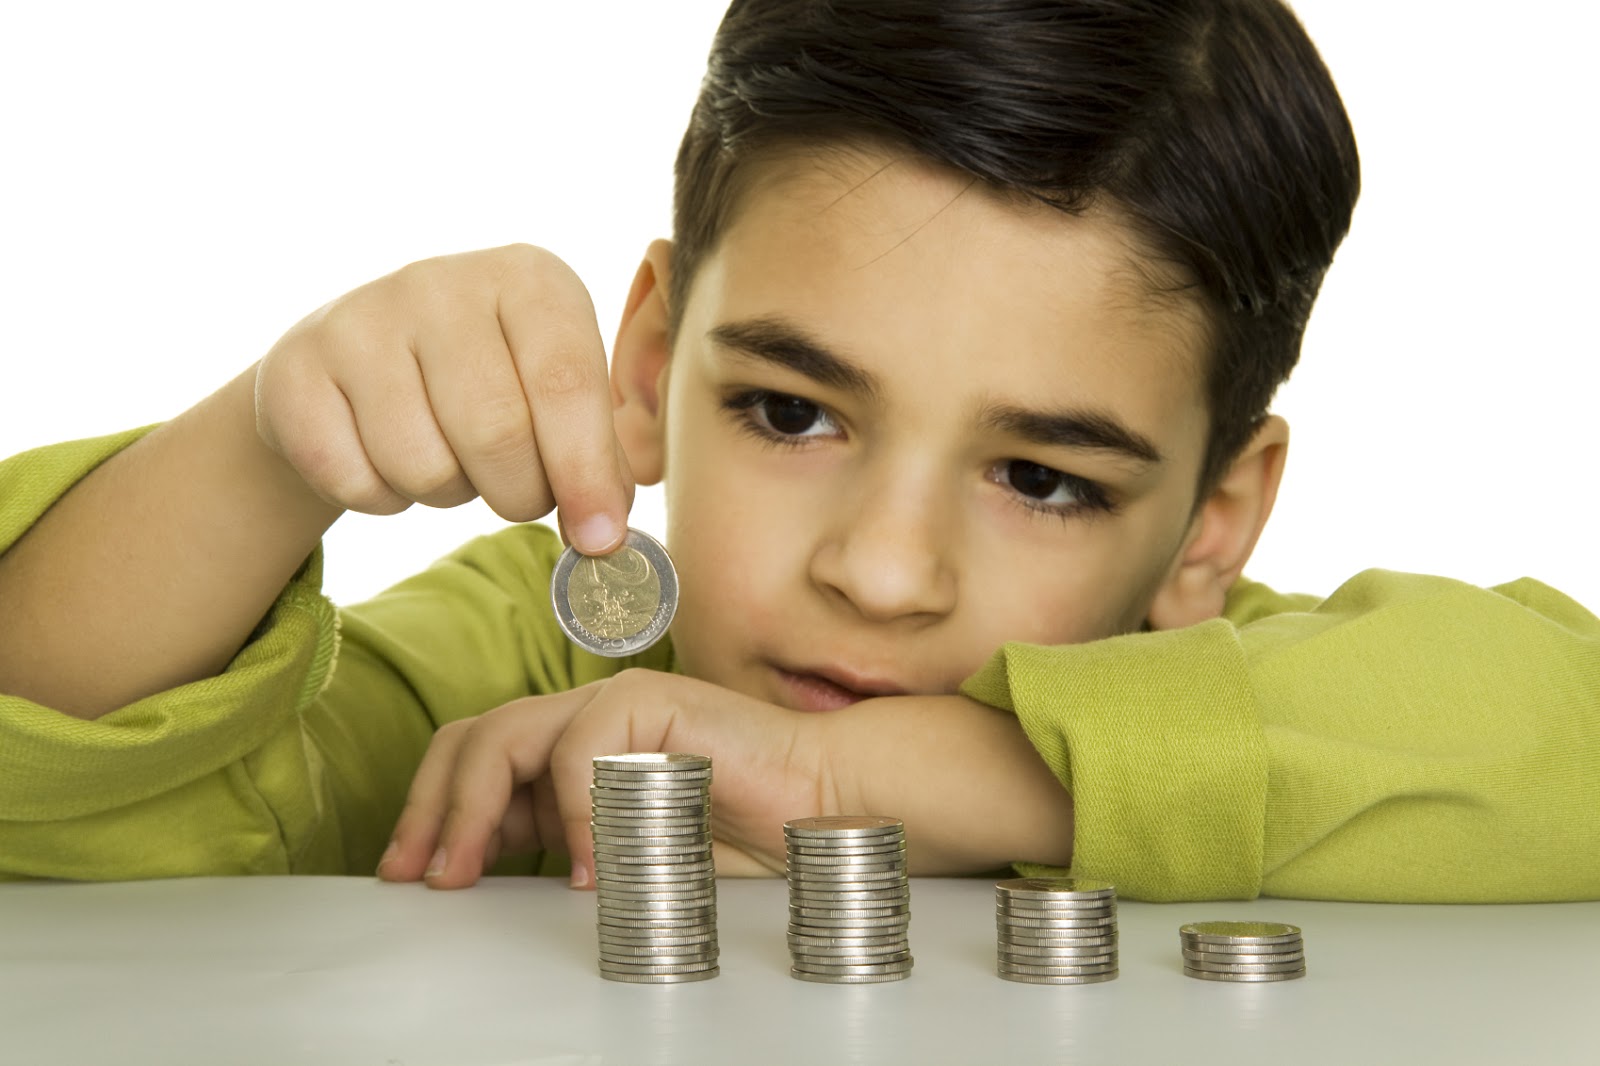 A Kid Counting Coins